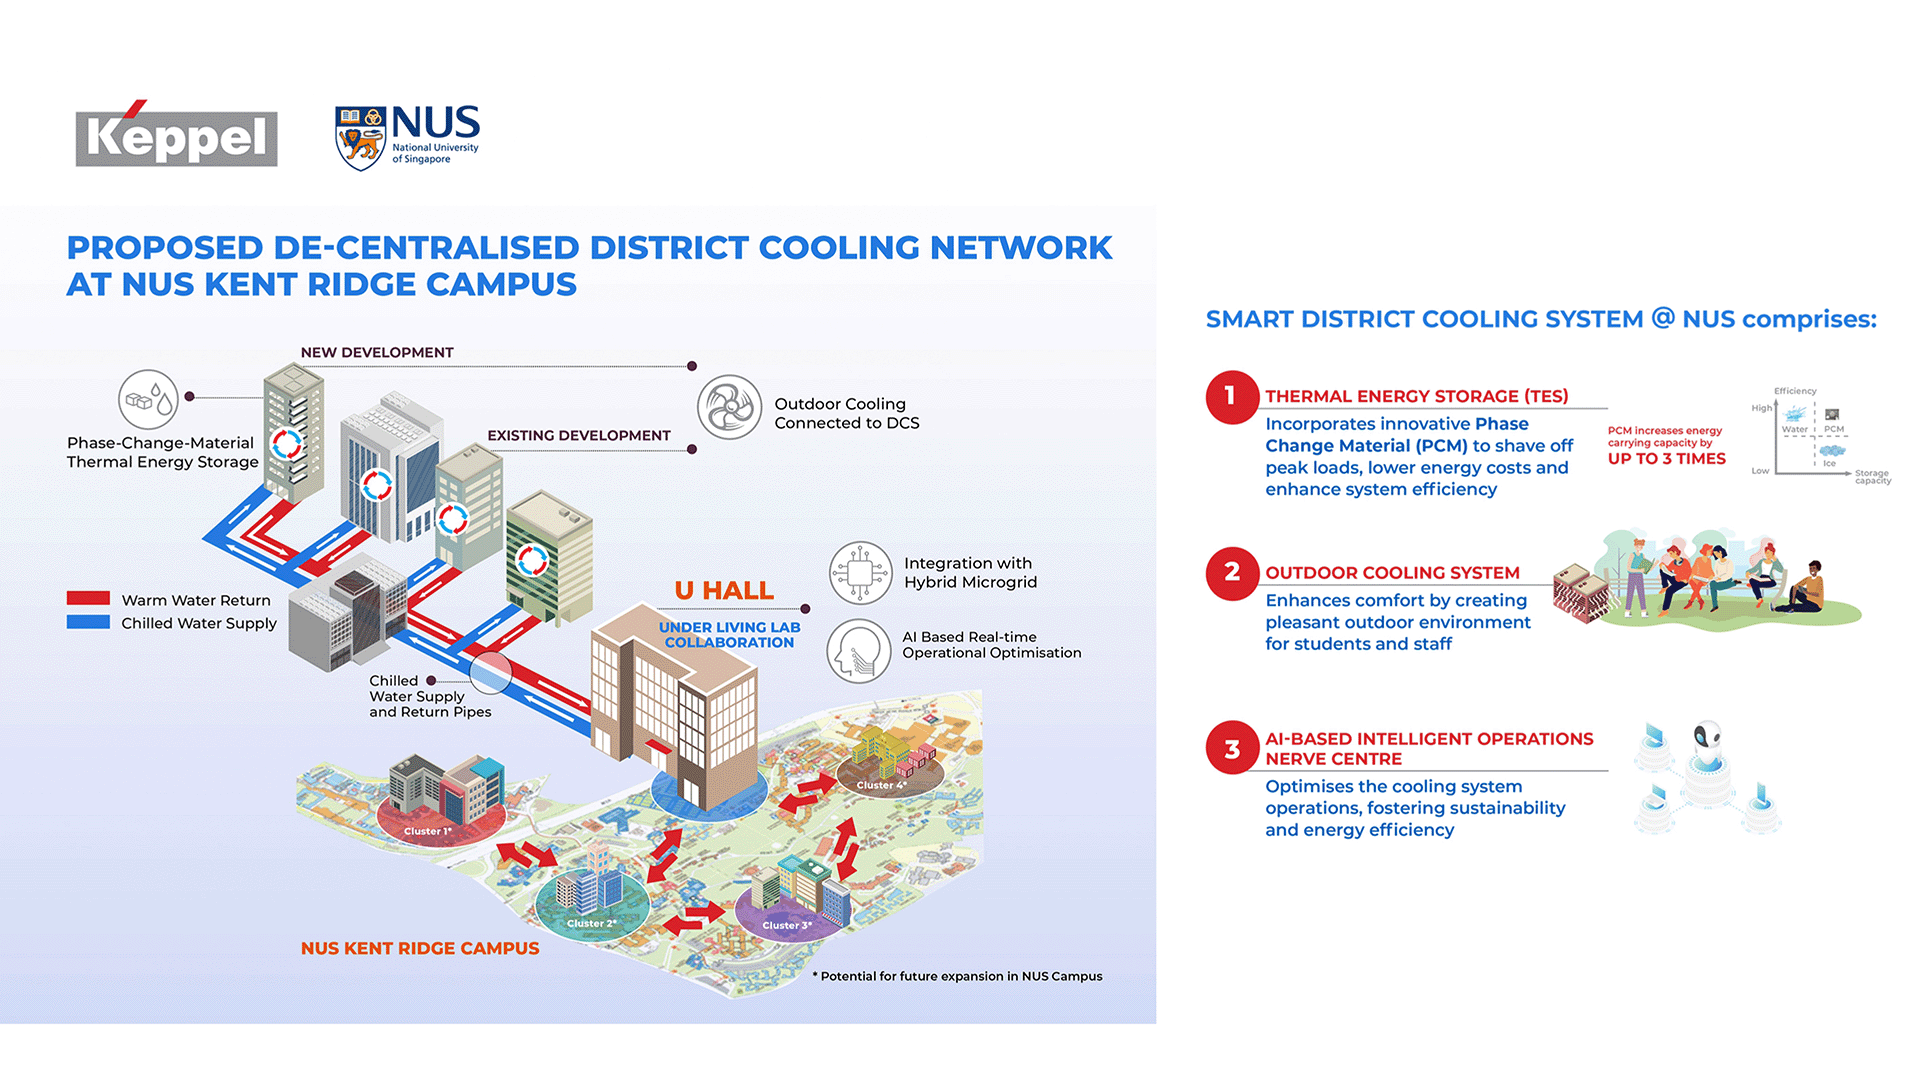 The district-wide cooling system that will be implemented at NUS University Hall and its adjacent developments will be integrated with the AC/DC hybrid microgrid which will potentially help to reduce the carbon footprint and energy consumption for cooling at NUS. Credit: Keppel Corporation